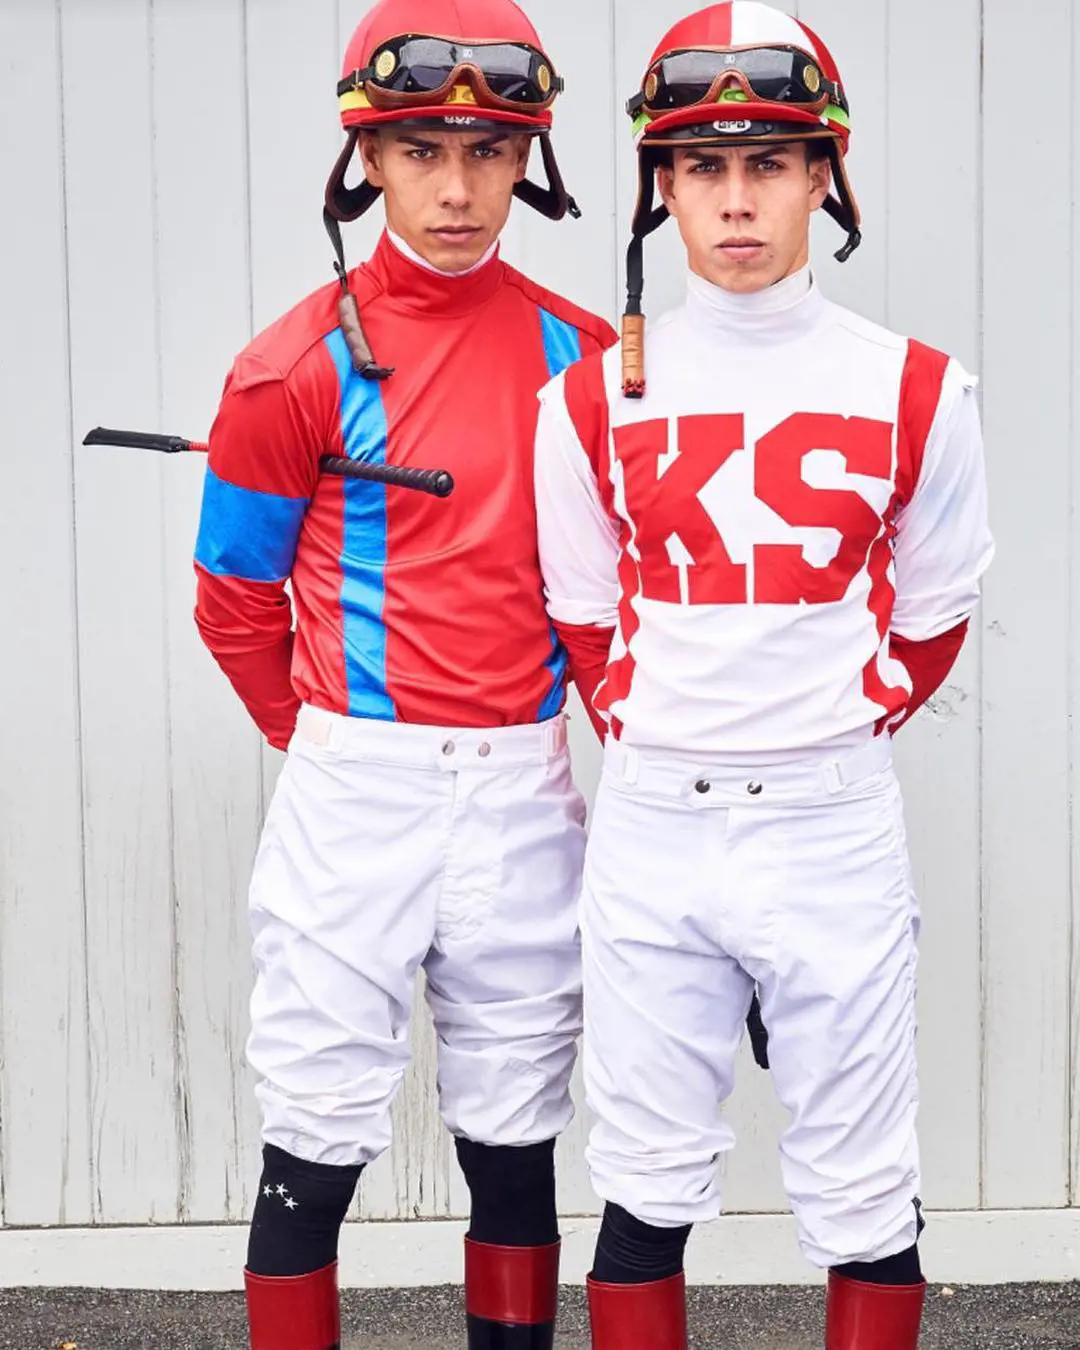 Jose and Irad during 2018 wearing jockey dress as they were ready to ride. 